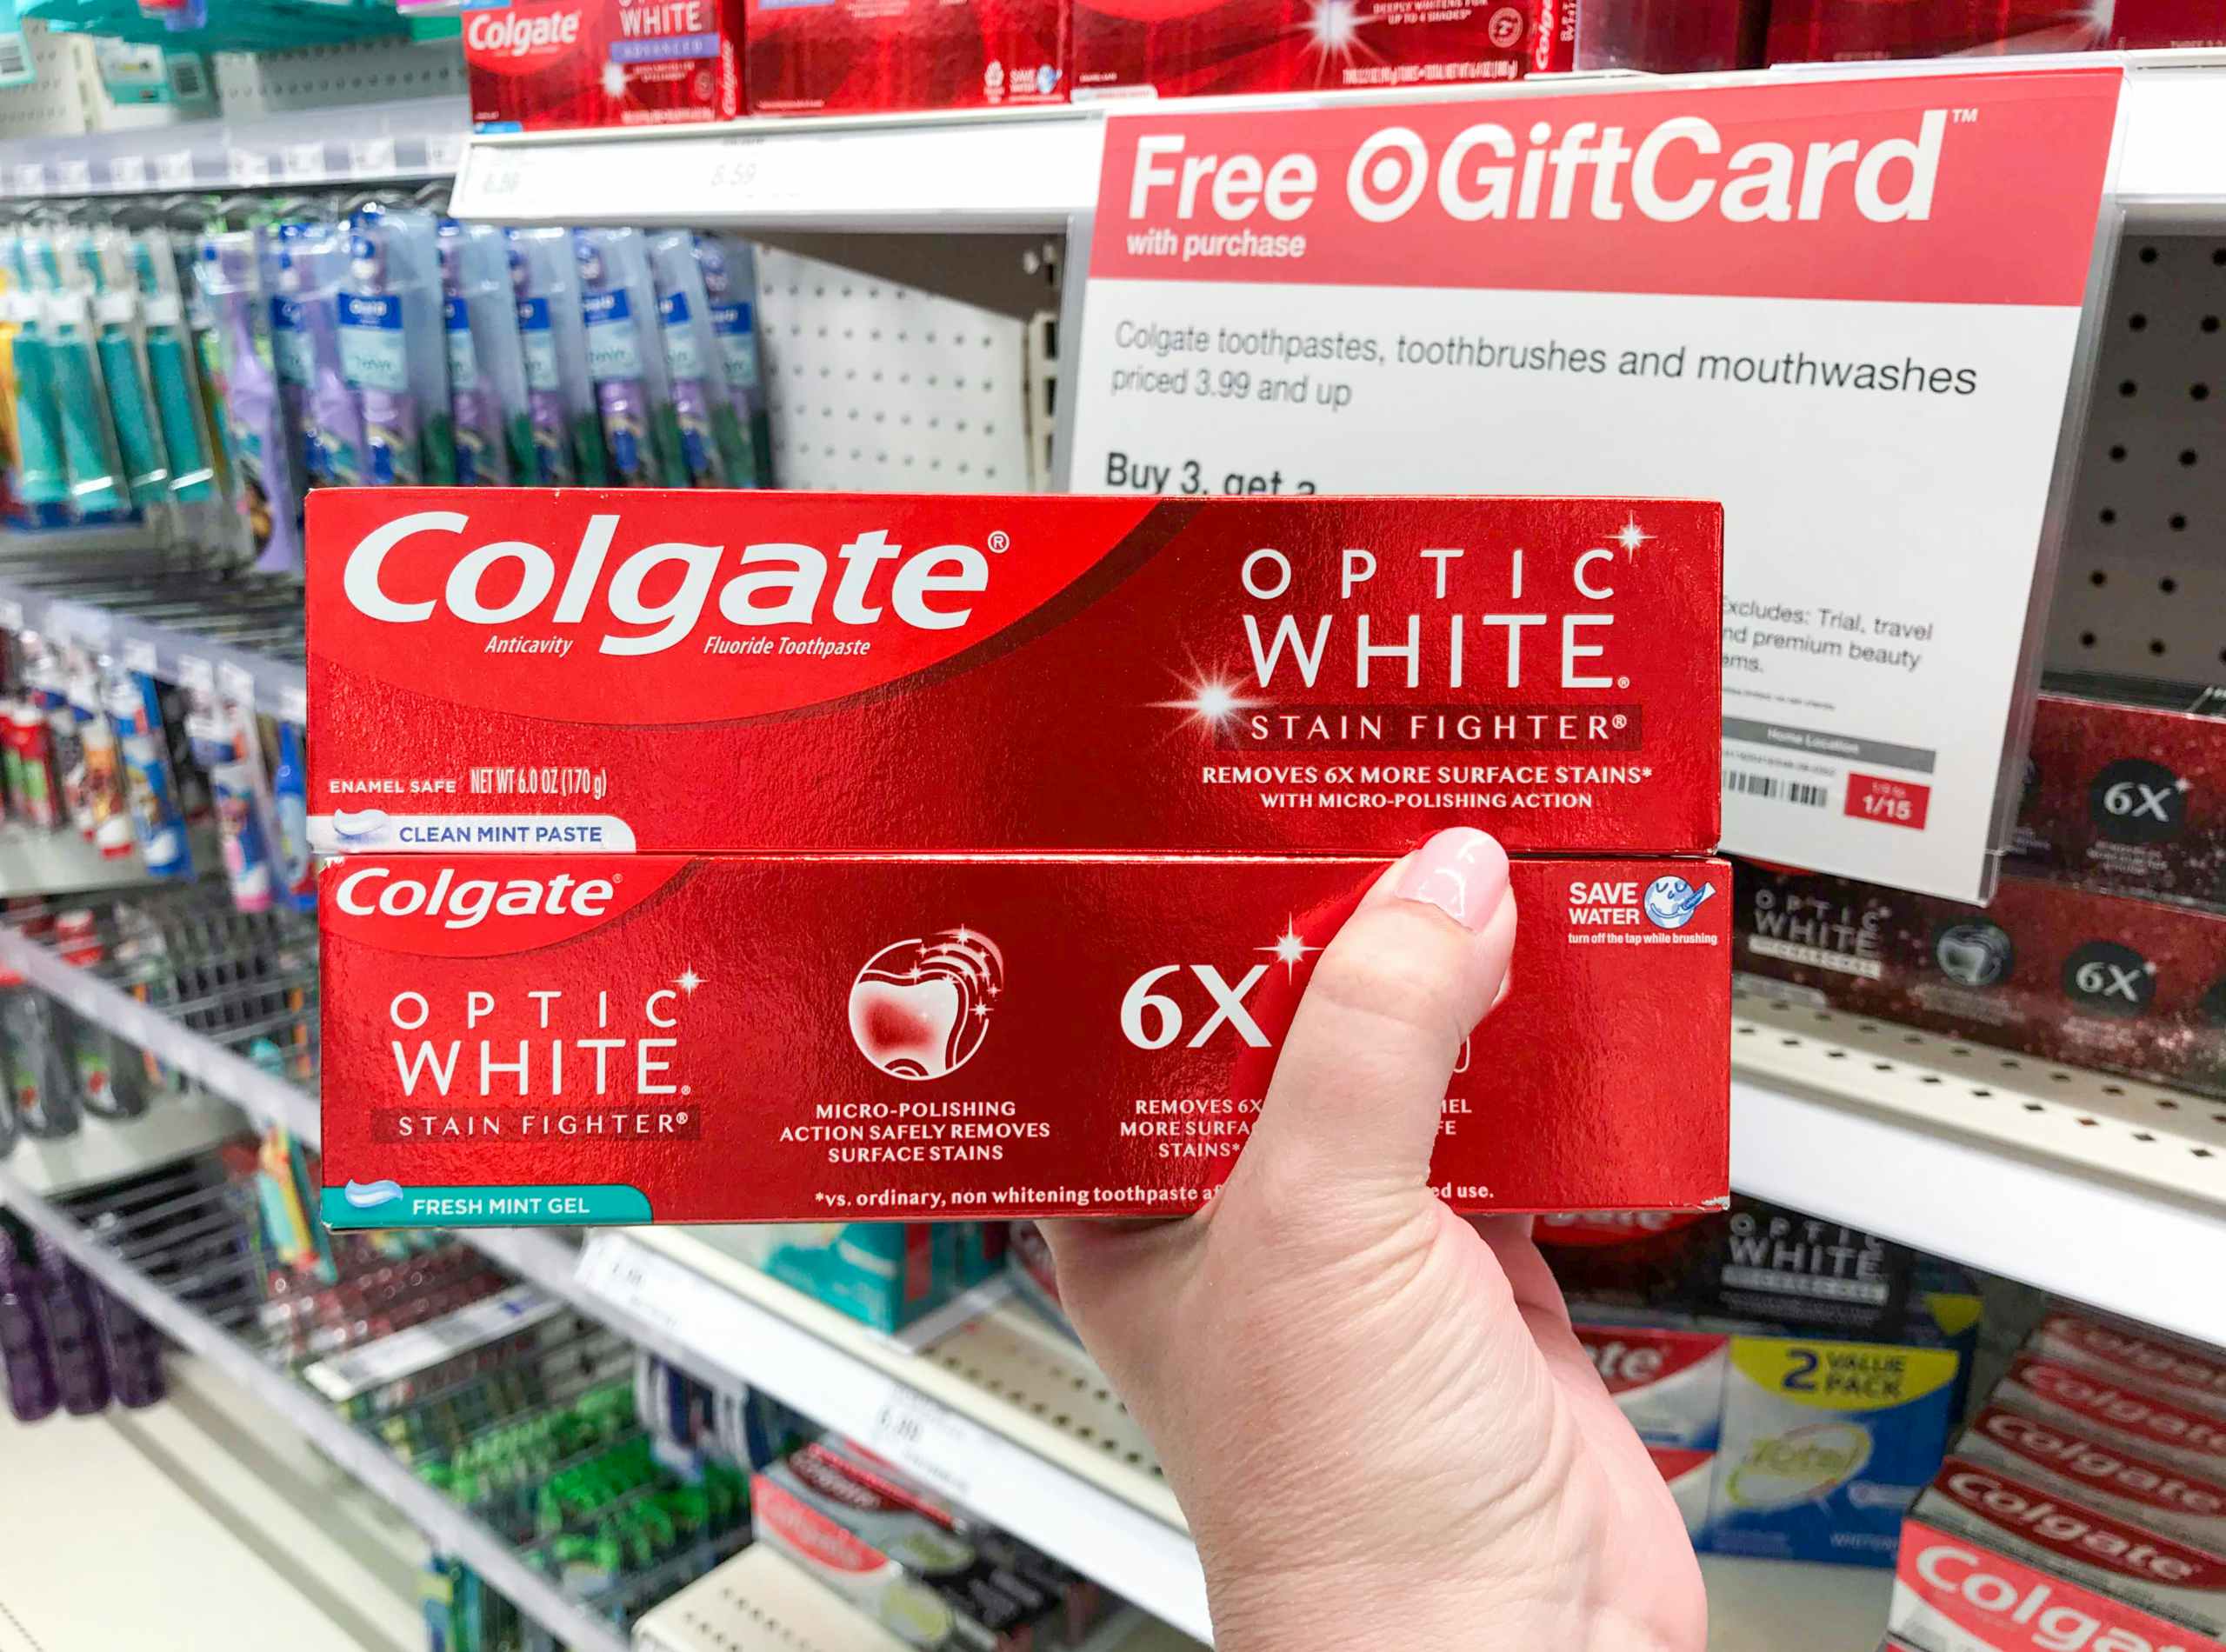 Colgate Optic White Toothpaste at Target